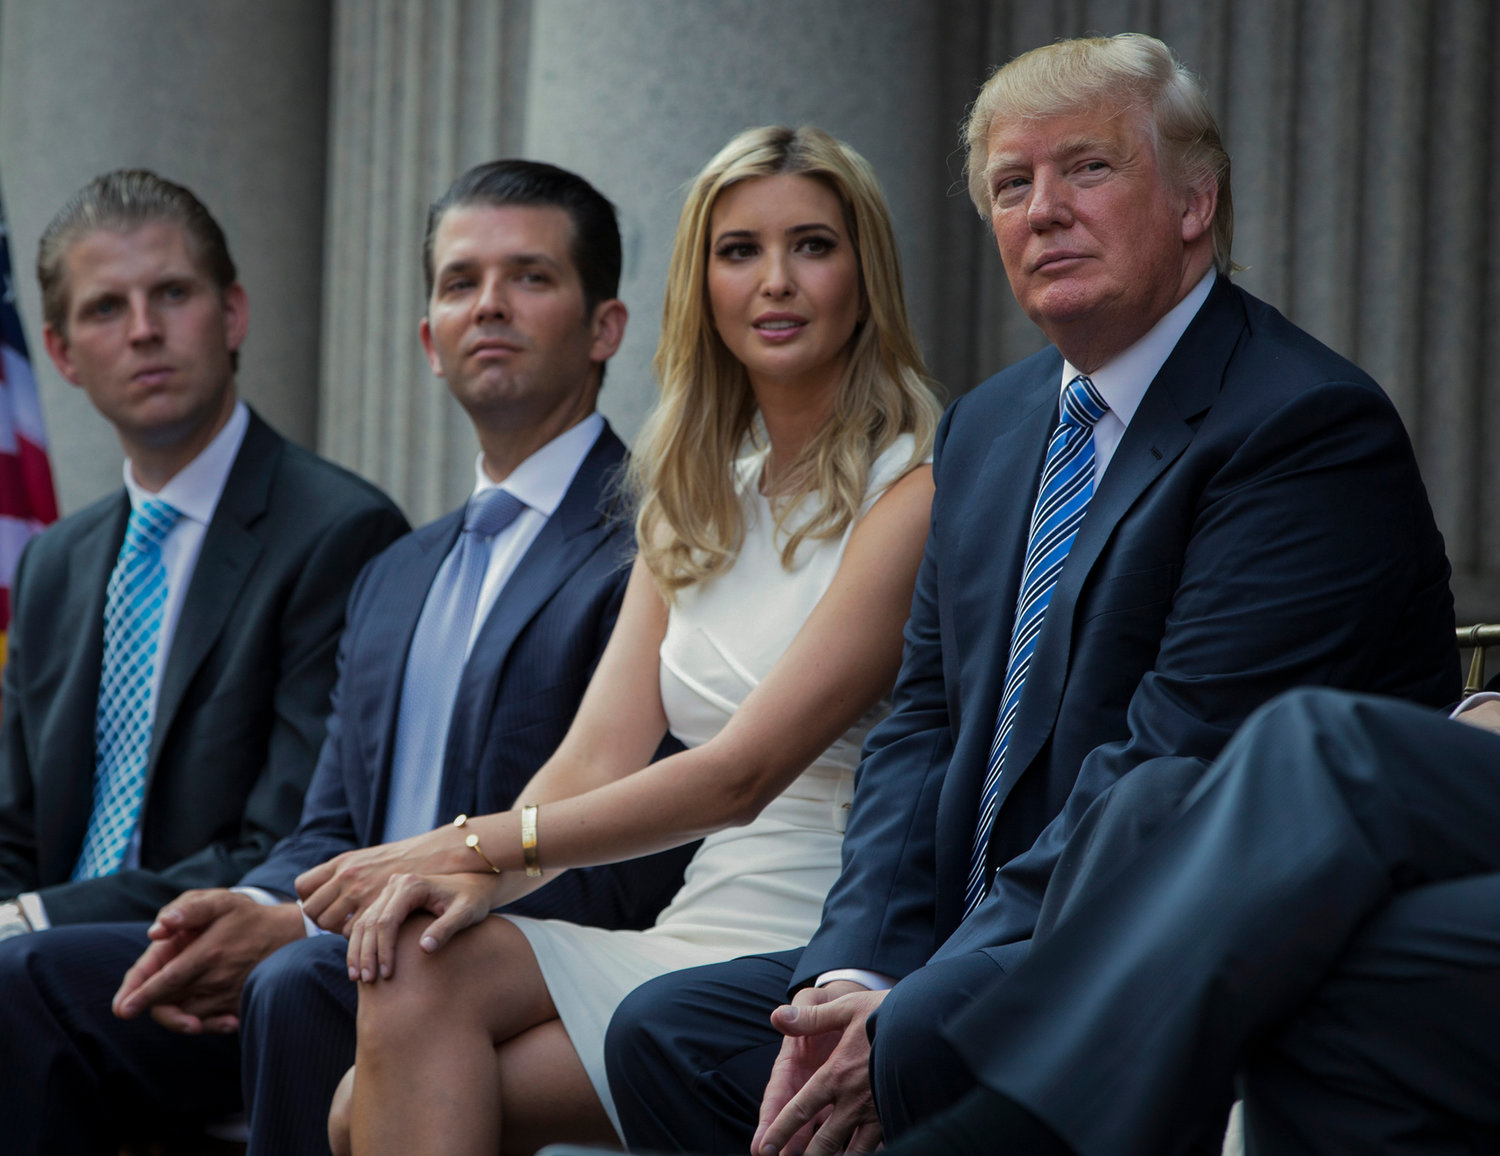 FILE - Donald Trump, right, sits with his children, from left, Eric Trump, Donald Trump Jr., and Ivanka Trump during a groundbreaking ceremony for the Trump International Hotel on July 23, 2014, in Washington. New York‚Äôs attorney general sued former President Donald Trump and his company on Wednesday, Sept. 21, 2022, alleging business fraud involving some of their most prized assets, including properties in Manhattan, Chicago and Washington, D.C. (AP Photo/Evan Vucci, File)